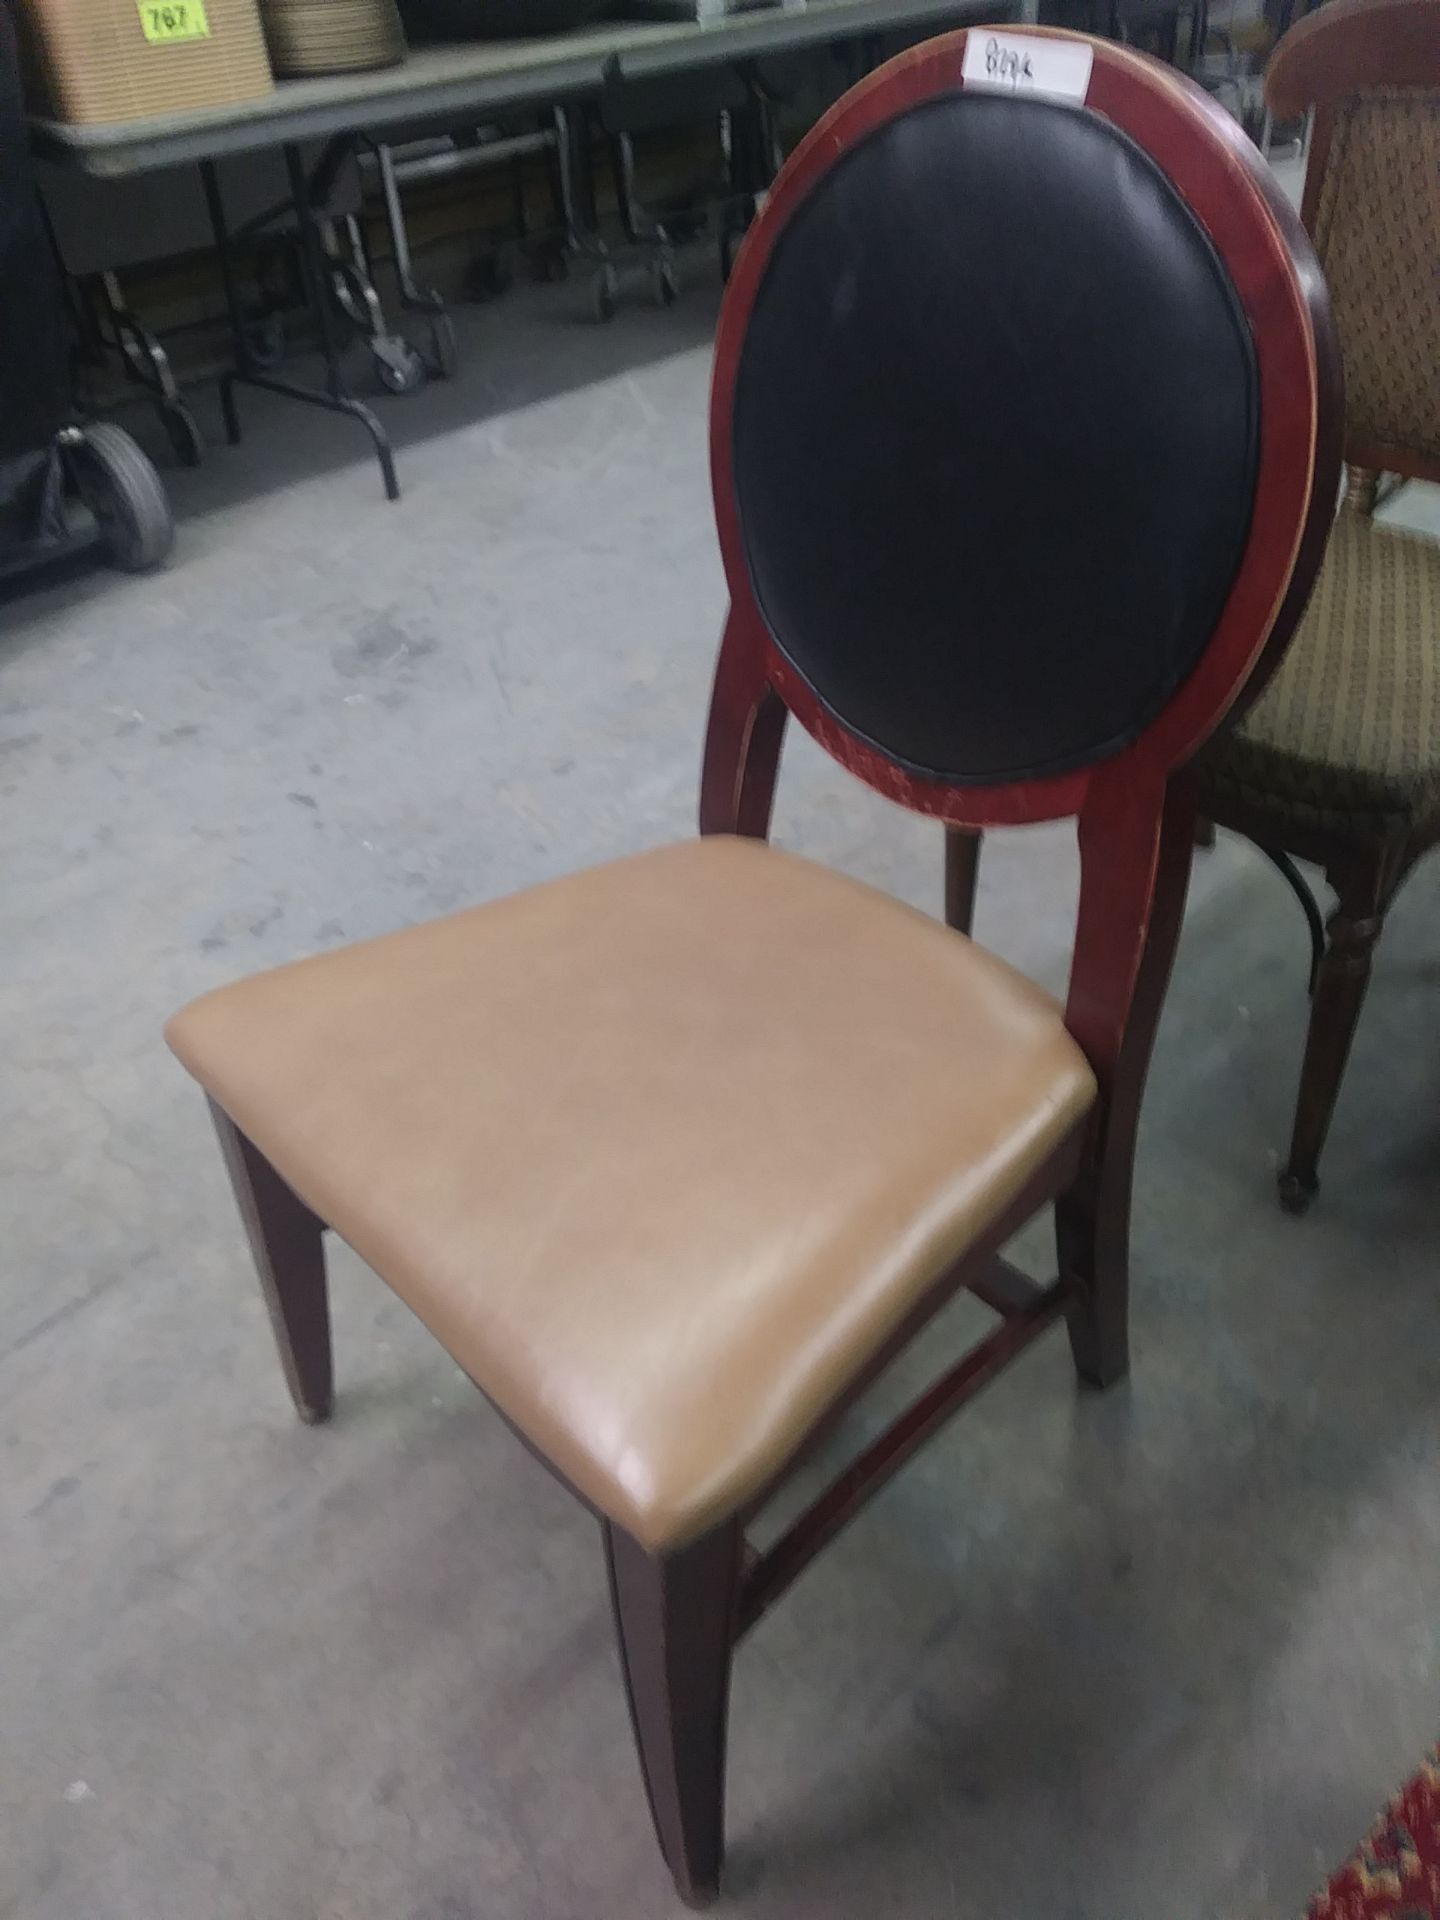 BROWN / TAN WOODEN FRAME DINING CHAIRS (QTY X MONEY) - Image 3 of 6